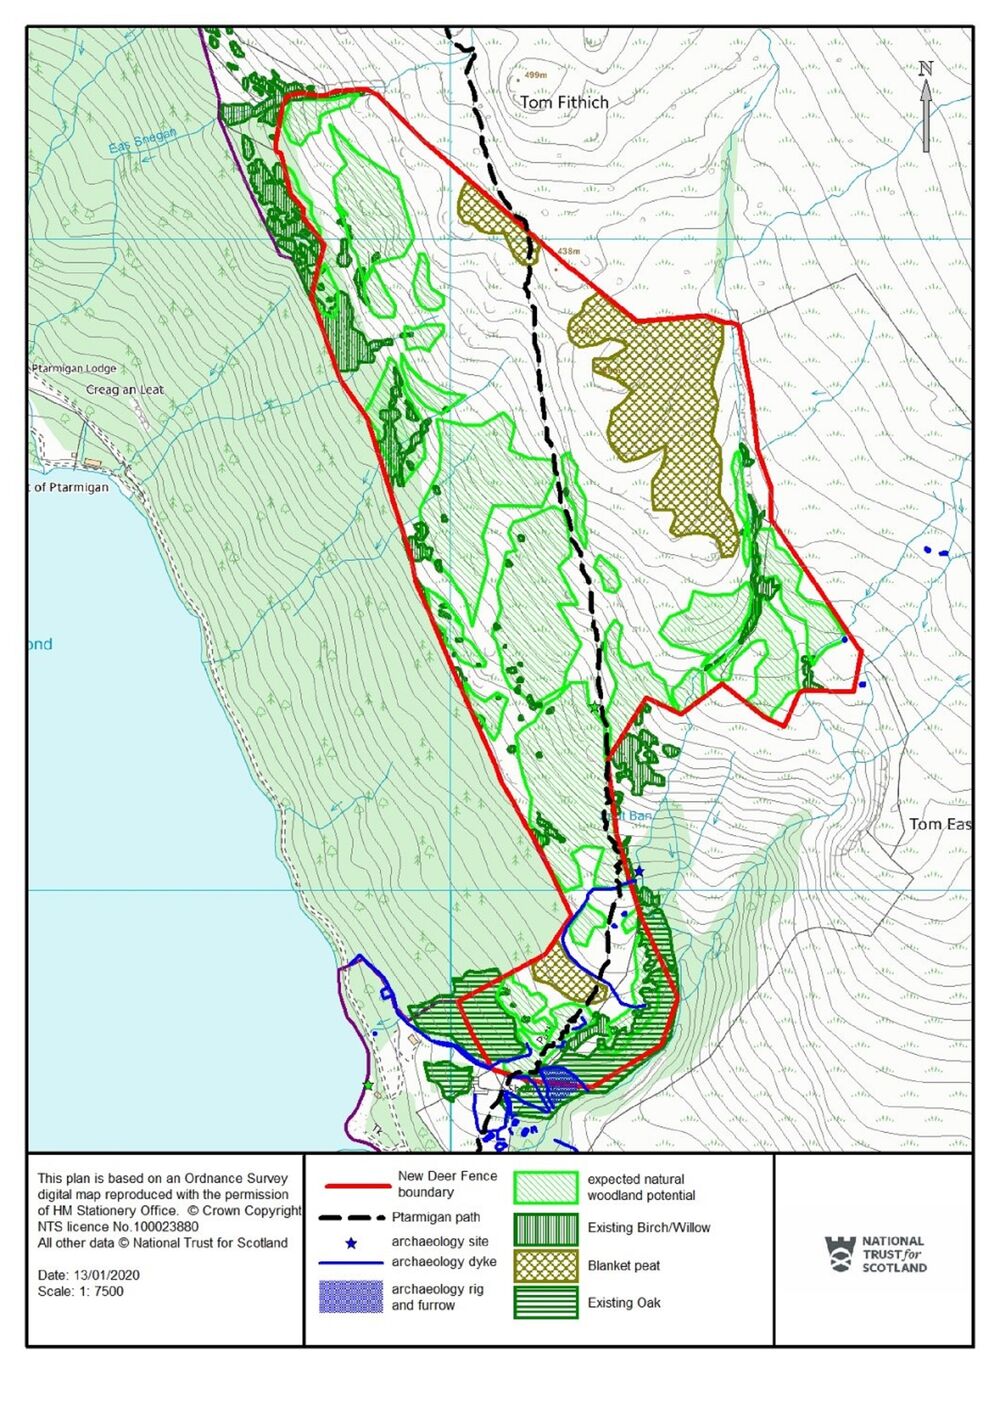 An OS map of the lower slopes of Ben Lomond, showing existing paths and deer fencing, as well as the projected area for natural woodland cover.